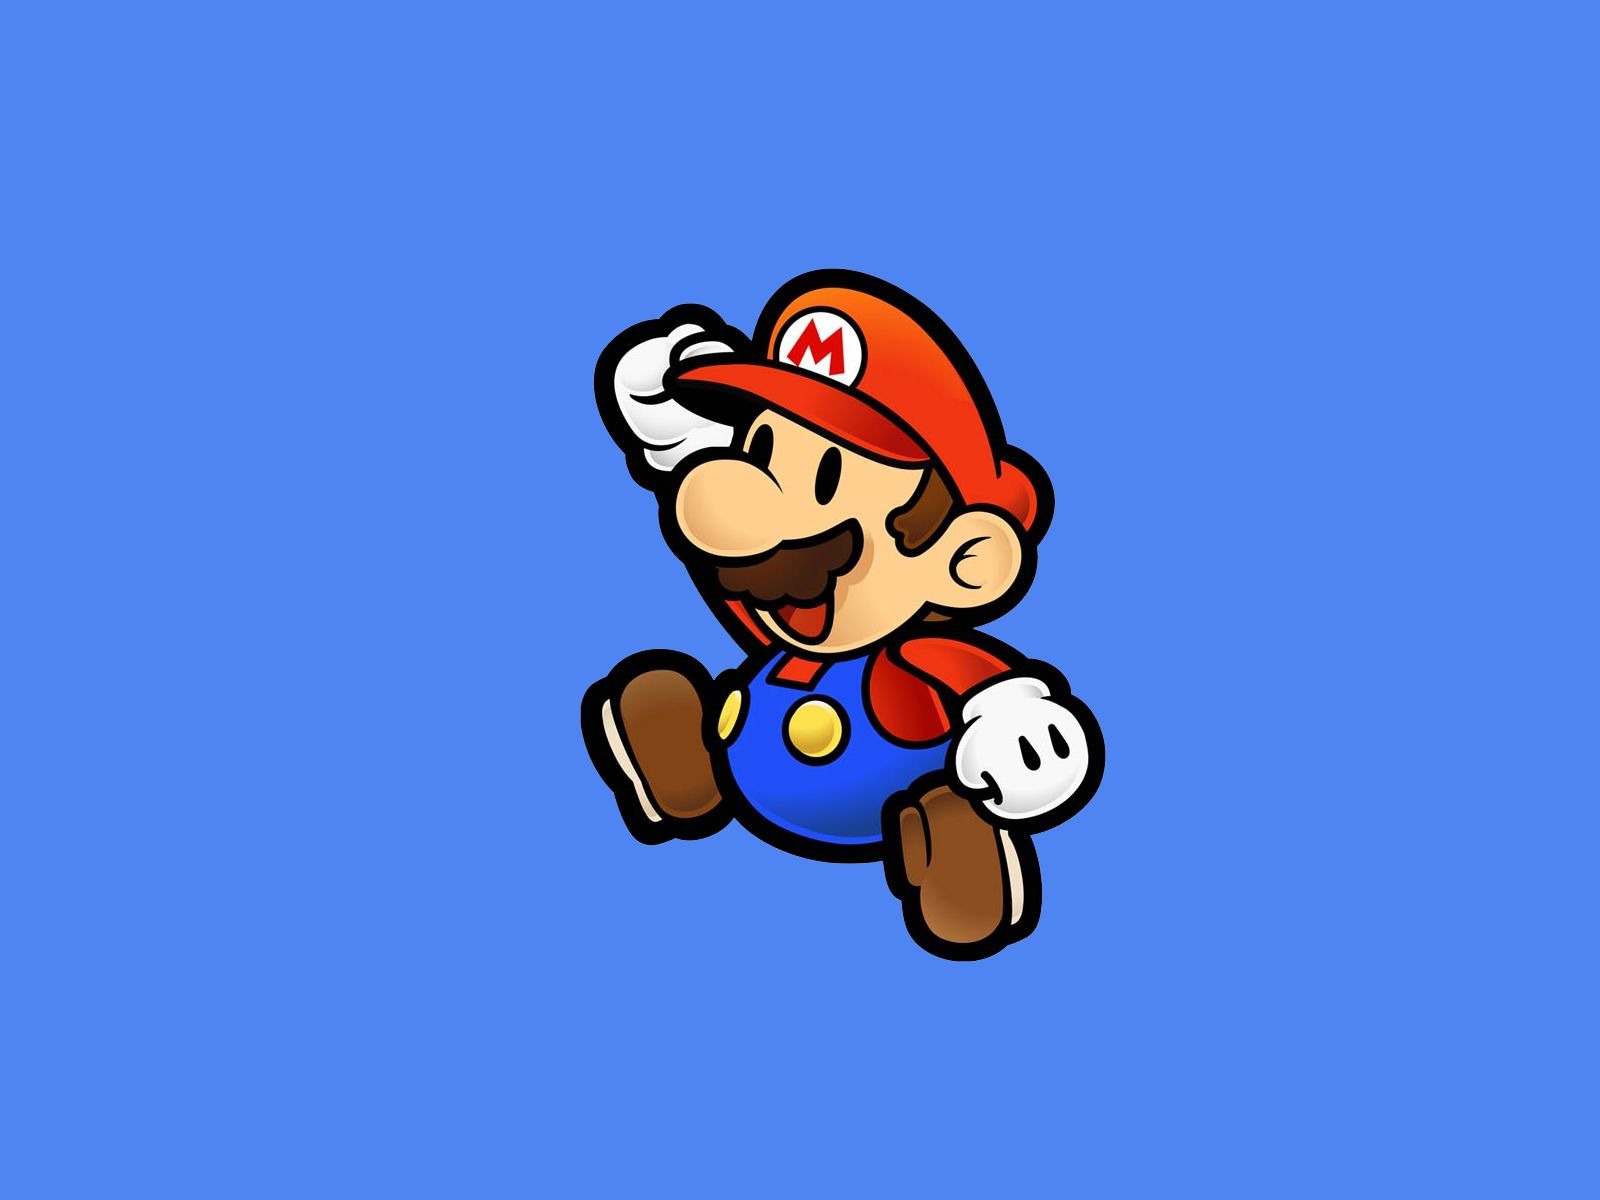 Super Mario Game Wallpapers   HD Backgrounds